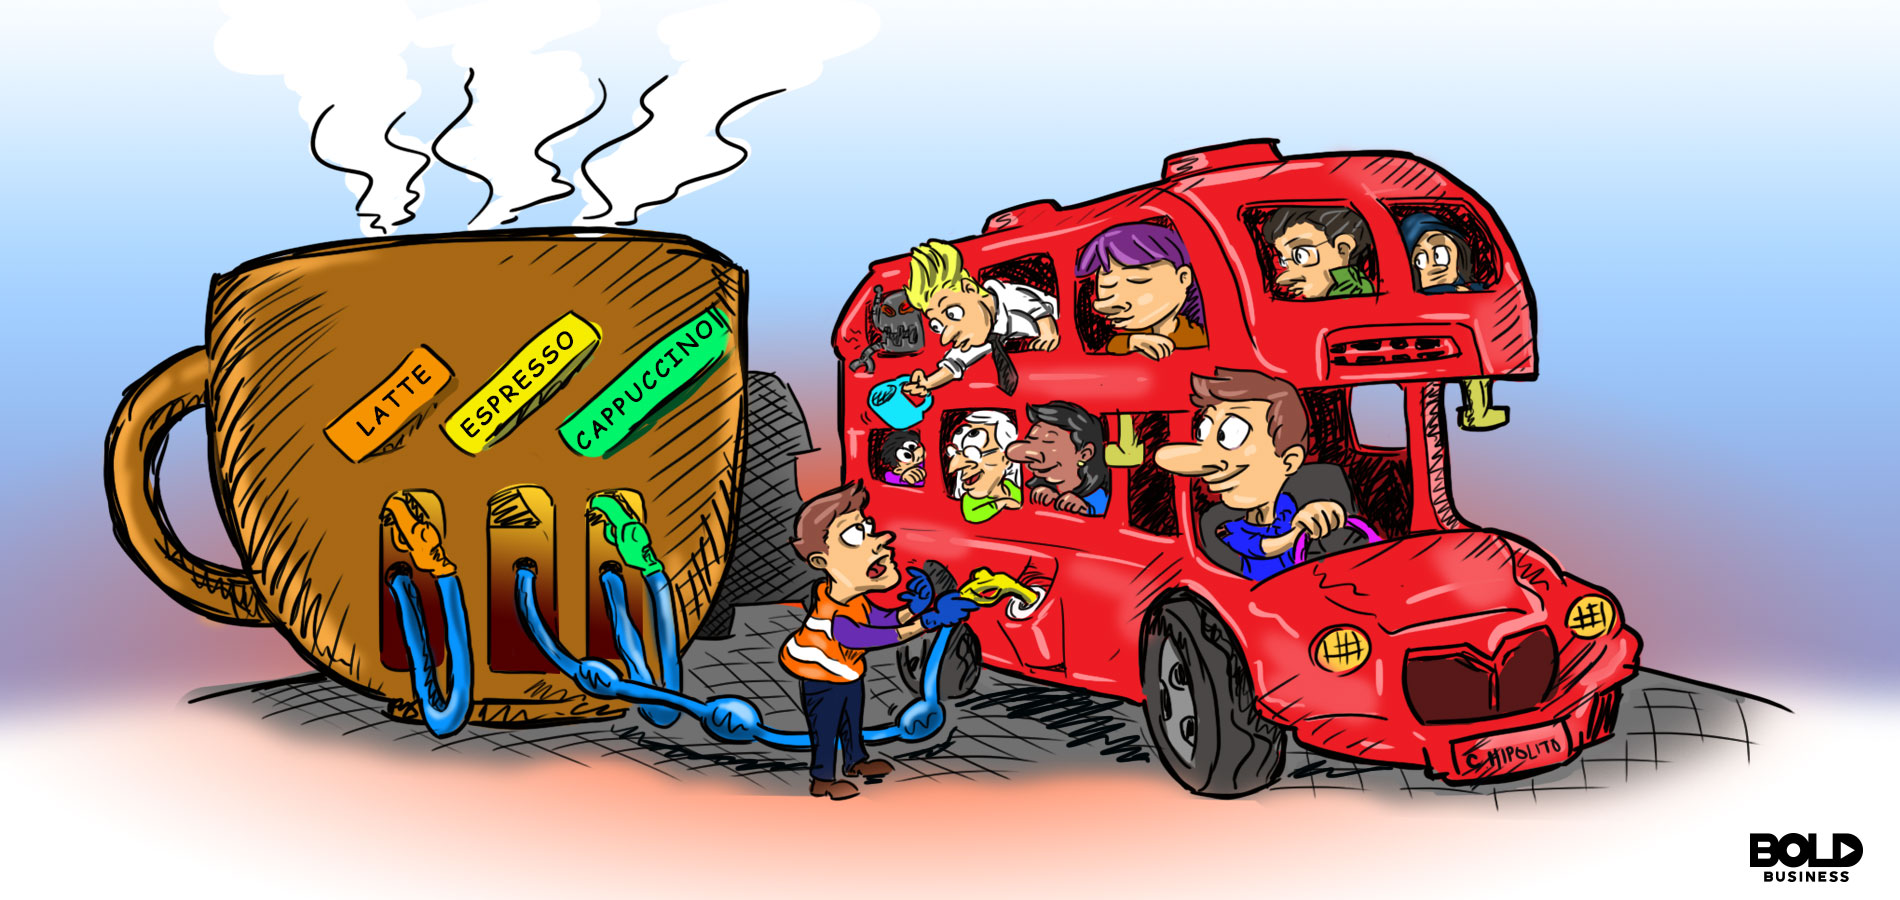 ‘Will Coffee Grounds Be Fueling Buses And Cars in the Future?’ Cartoon